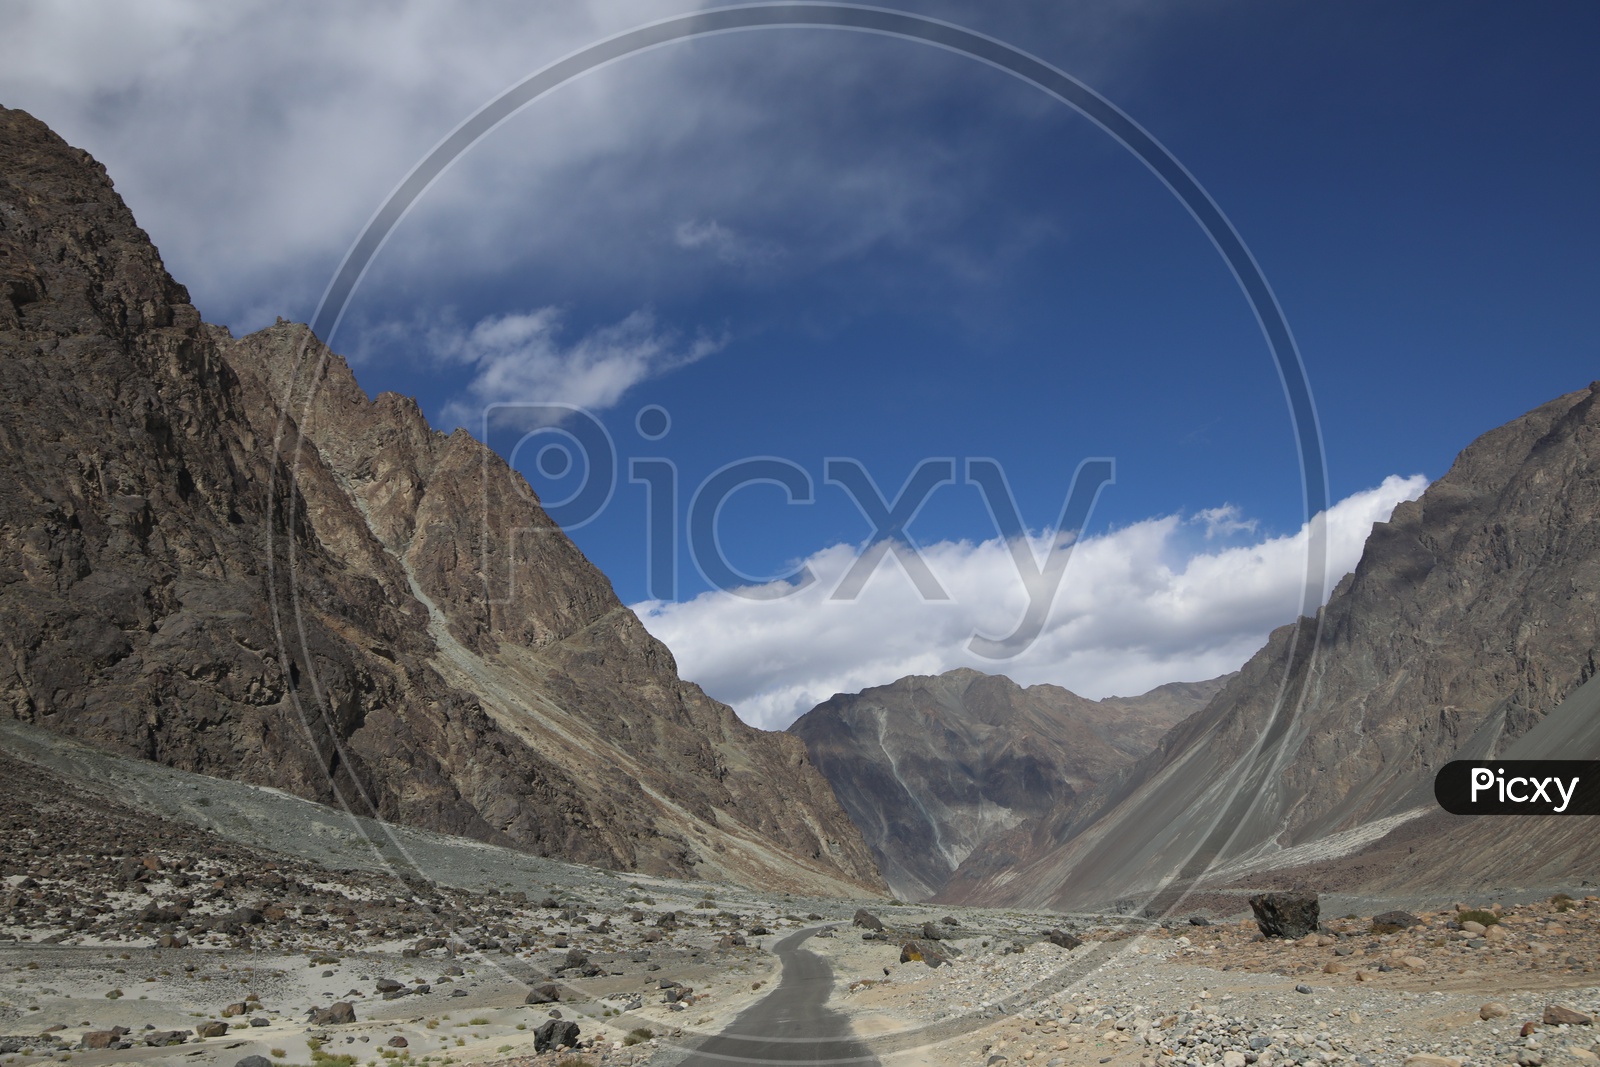 Roadways of leh with beautiful snow capped mountains in the background